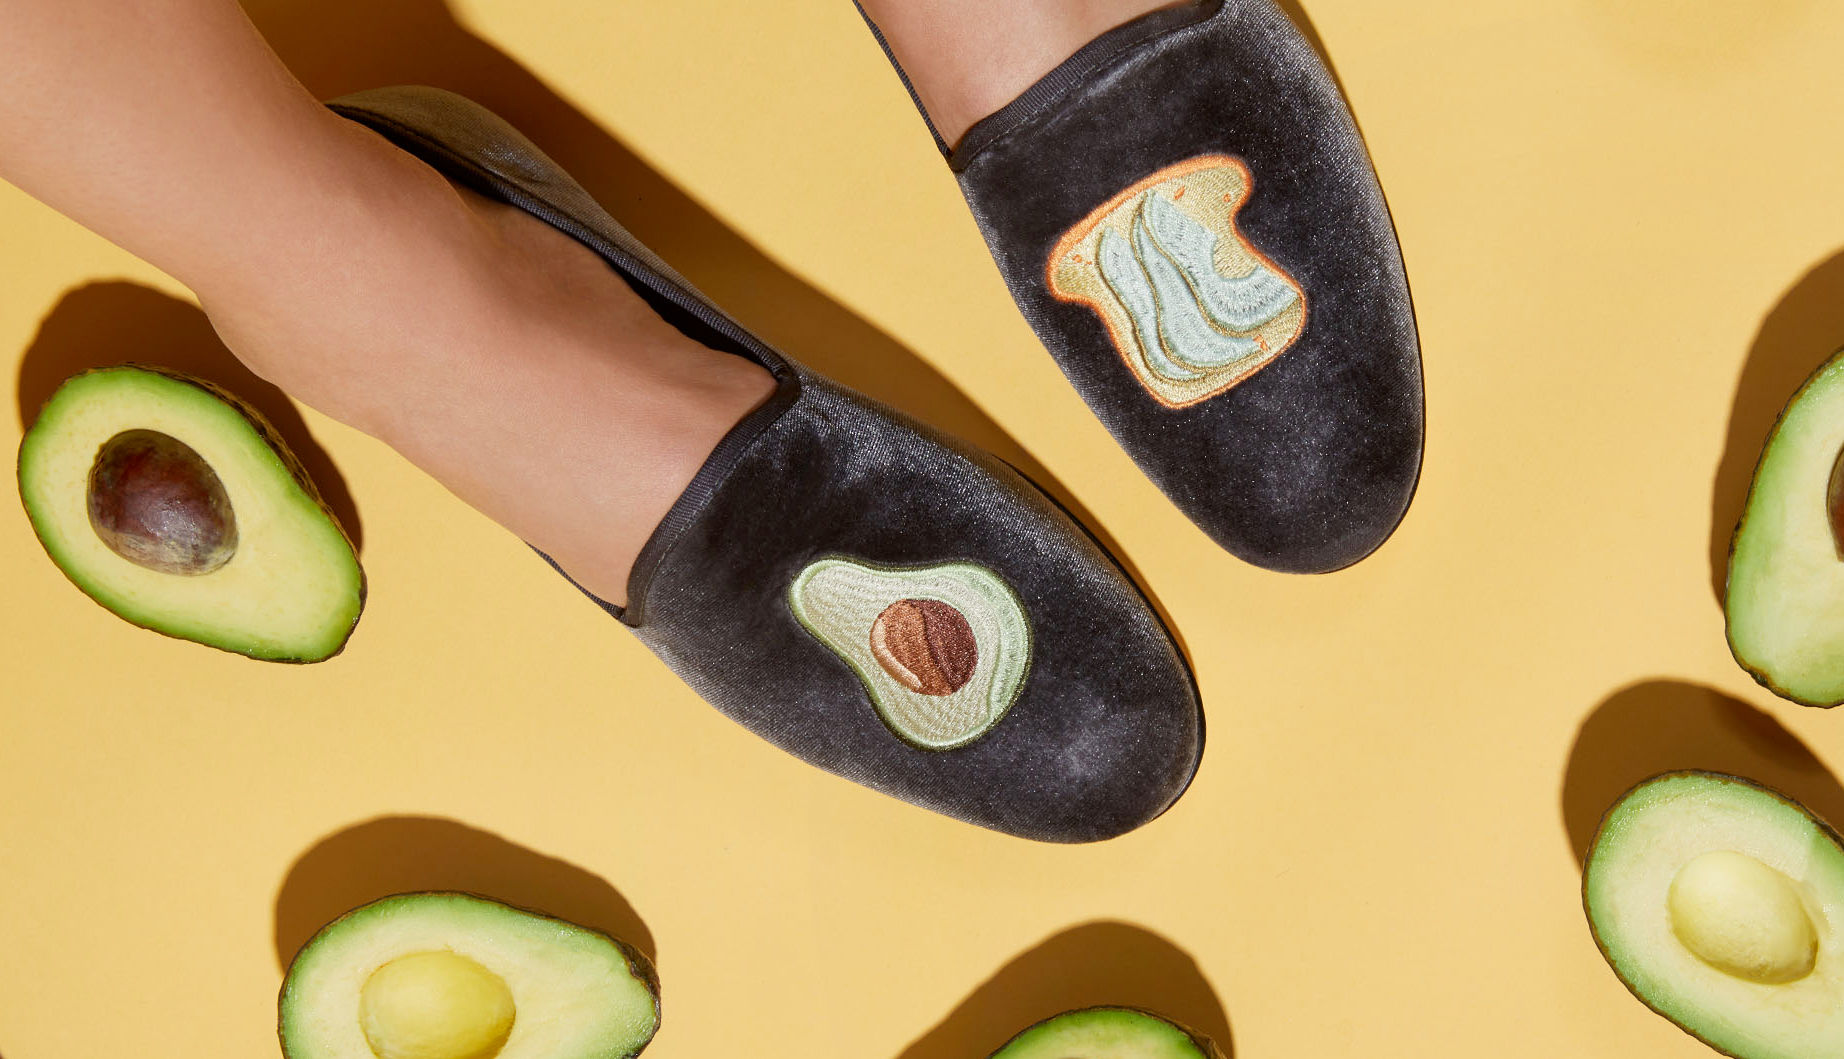 This super fun shoe collection is one for food lovers